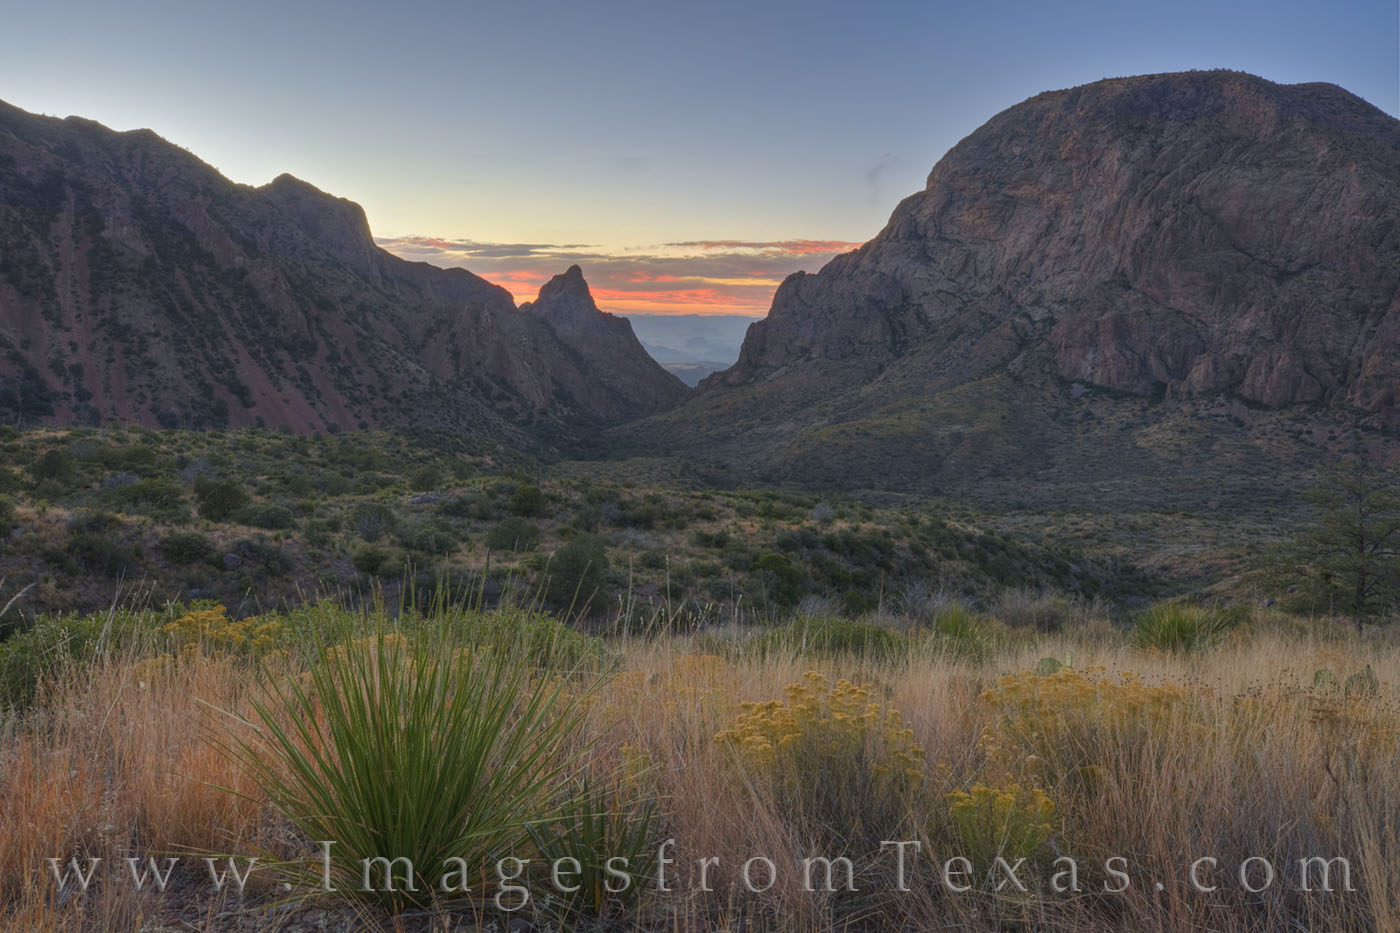 On a calm evening in November, the Chisos Mountains stand silent in Big Bend National Park. This view is an iconic landscape...